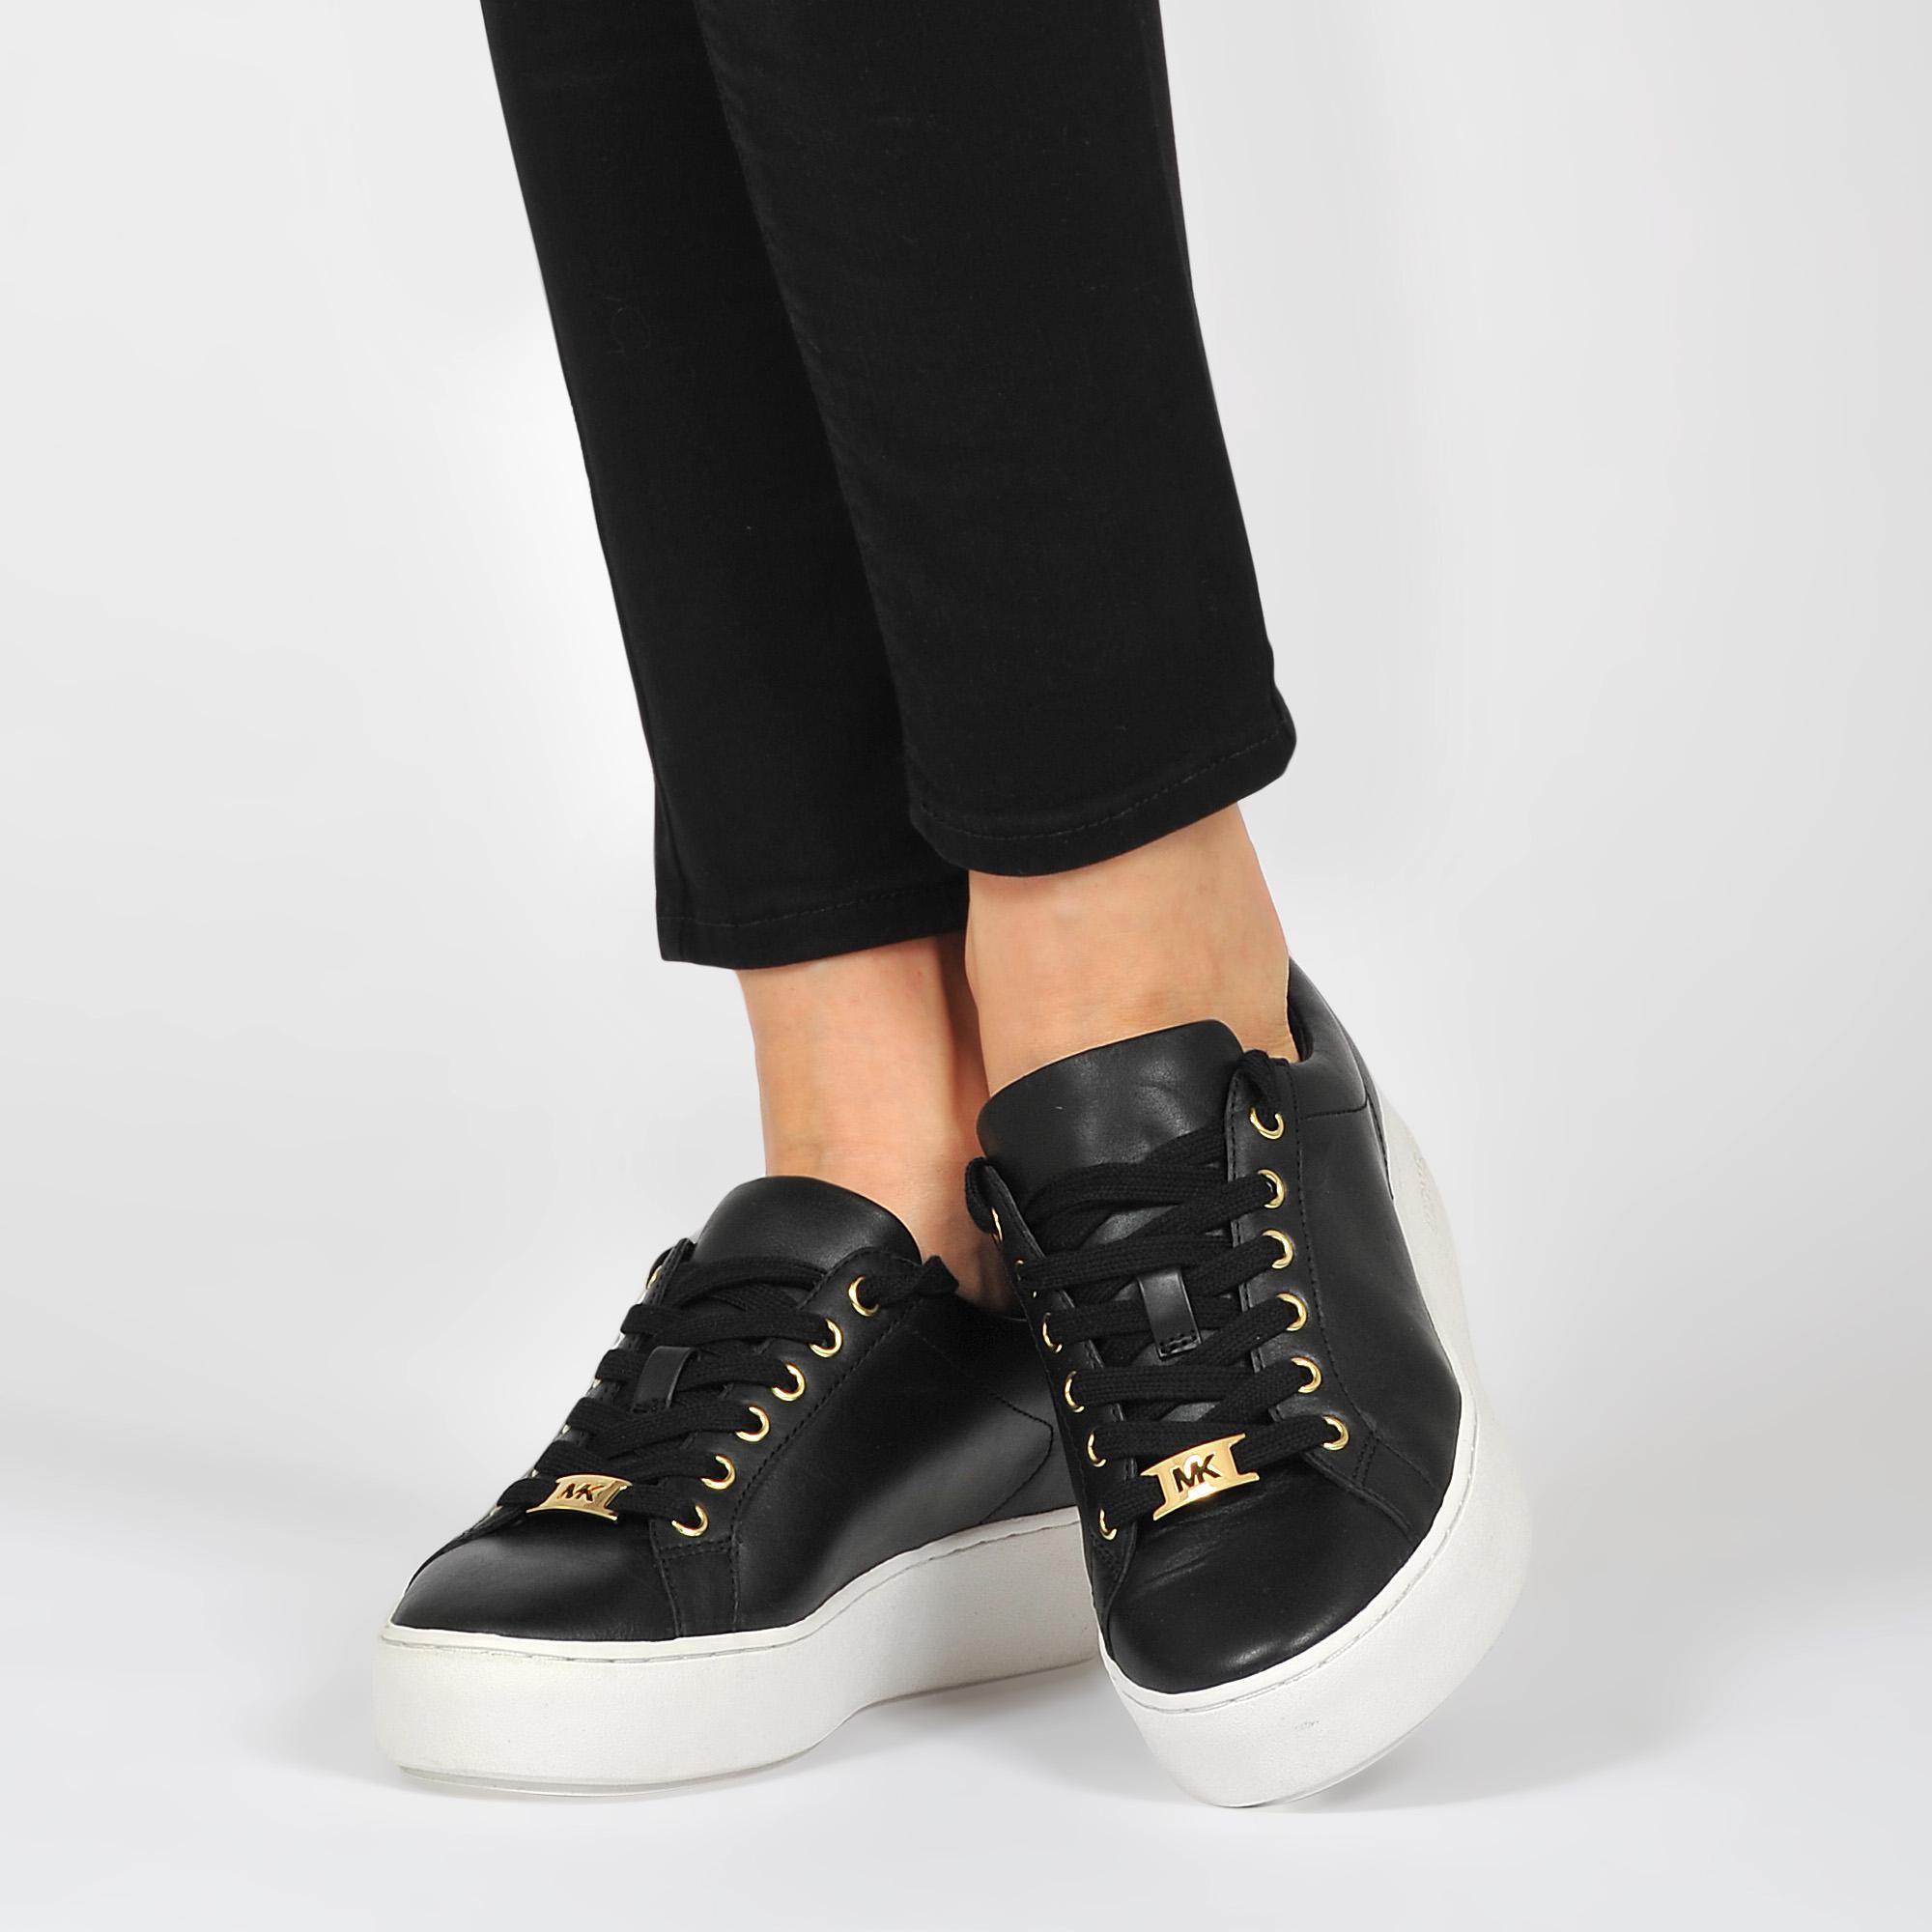 MICHAEL Michael Kors Leather Poppy Lace Up Sneakers in Black - Lyst